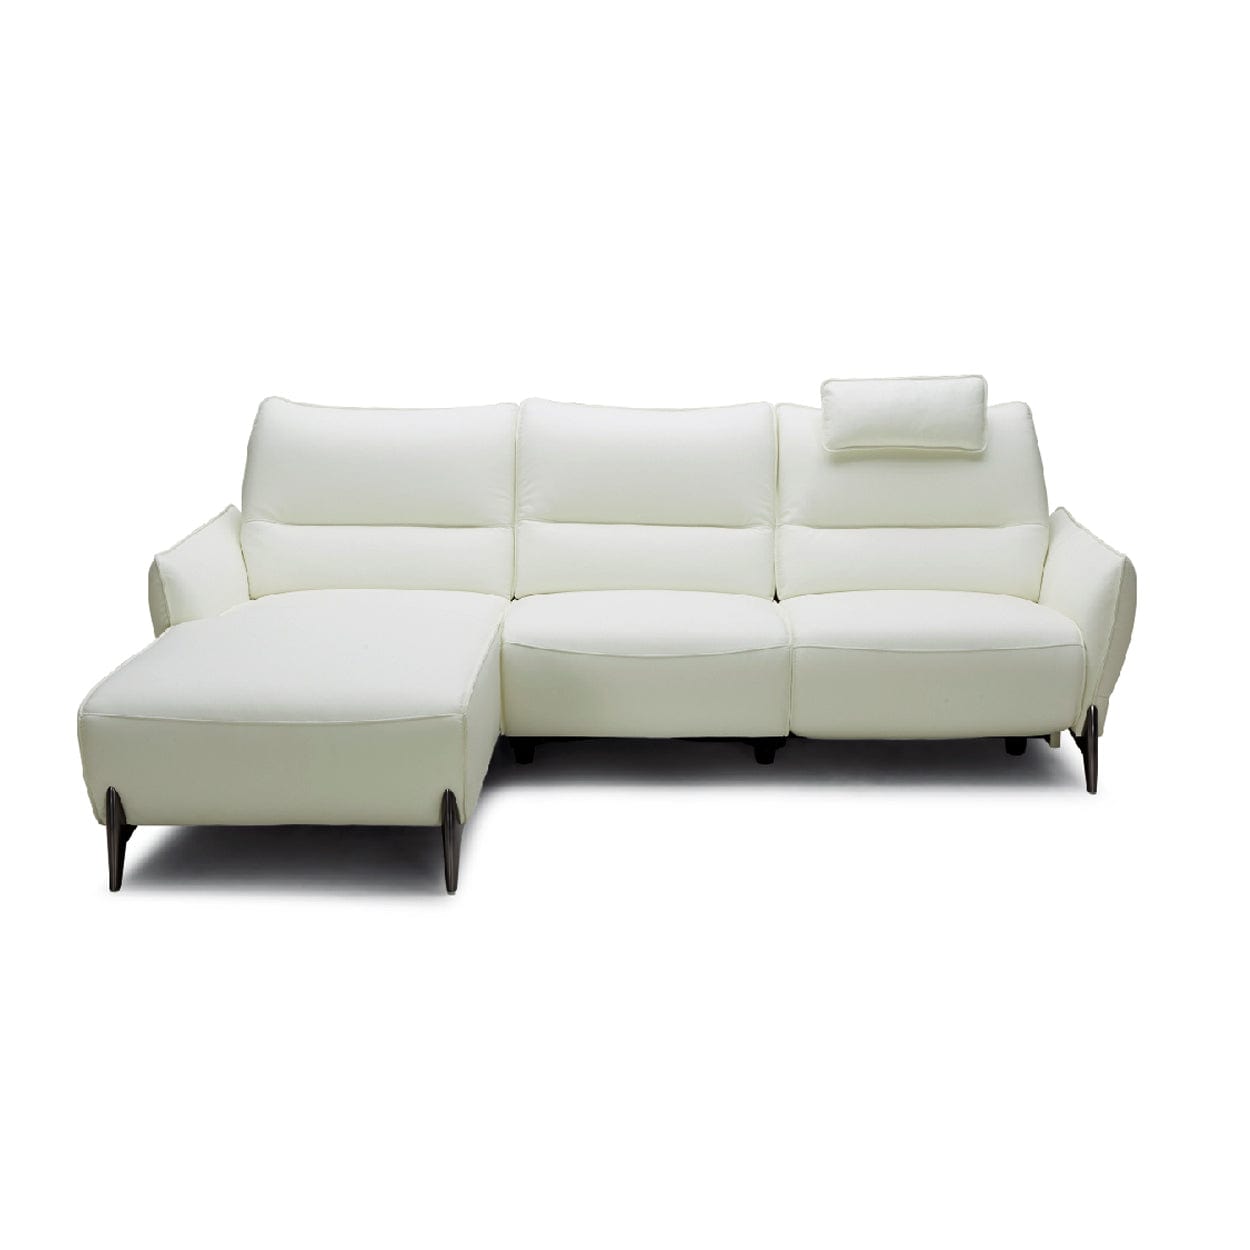 2668 Leather Sofa 3-Seater, Chaise Lounge (M Series) picket and rail